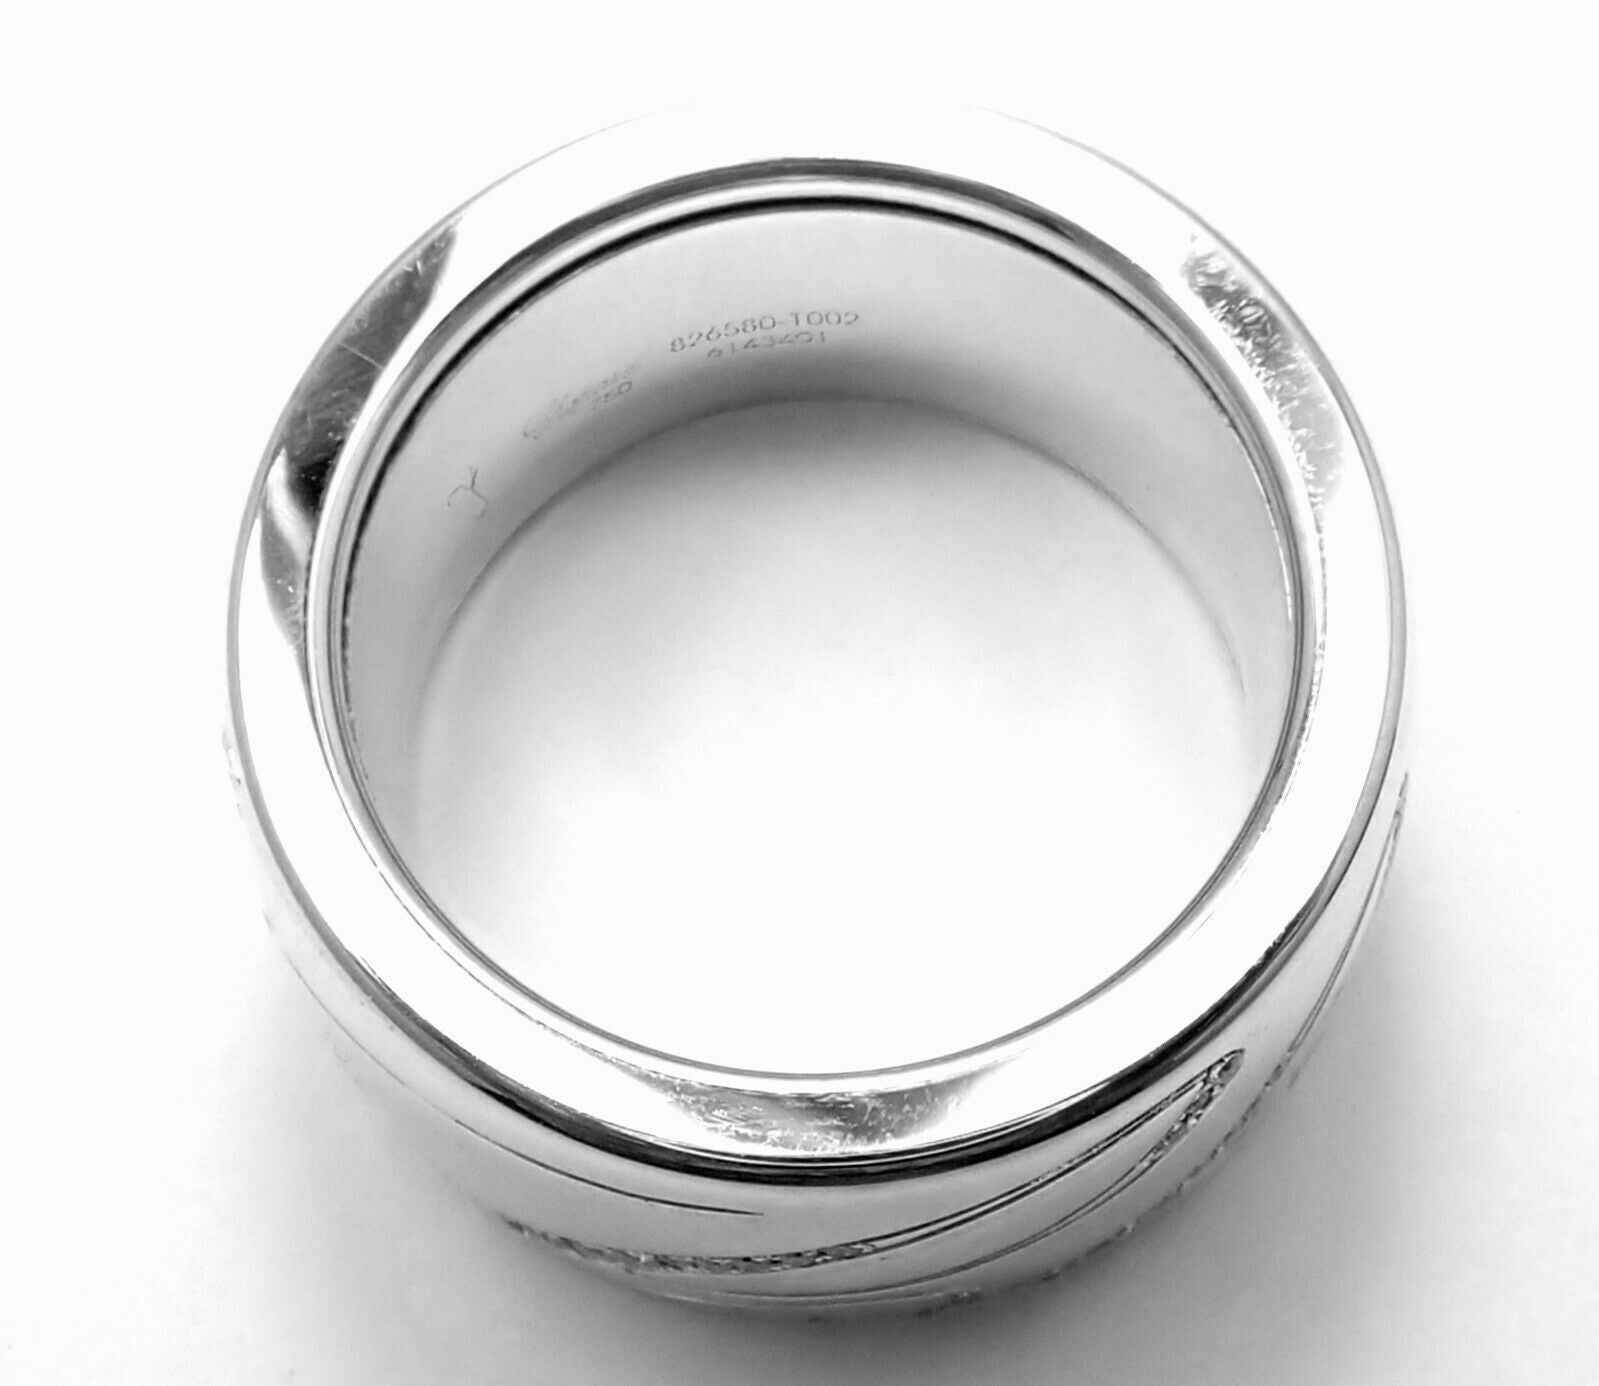 Chopard Jewelry & Watches:Fine Jewelry:Rings Chopard Chopardissimo 18k White Gold Diamond Signature Band Ring Size 6 Cert